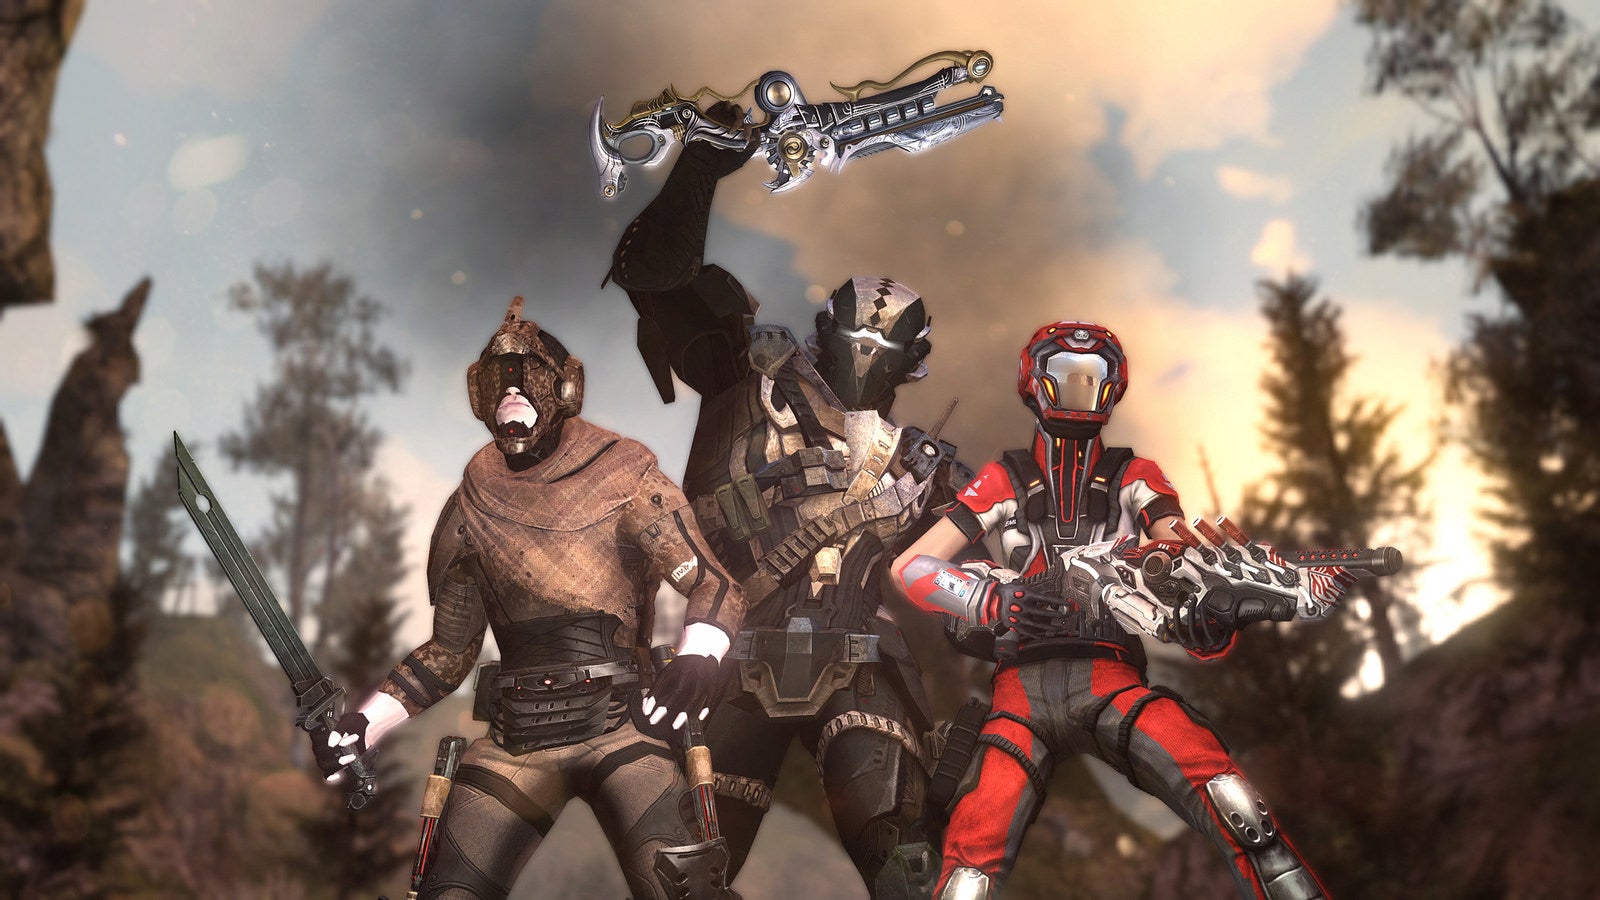 Image for Defiance 2050 closed beta announced for April on PC, PS4, and Xbox One